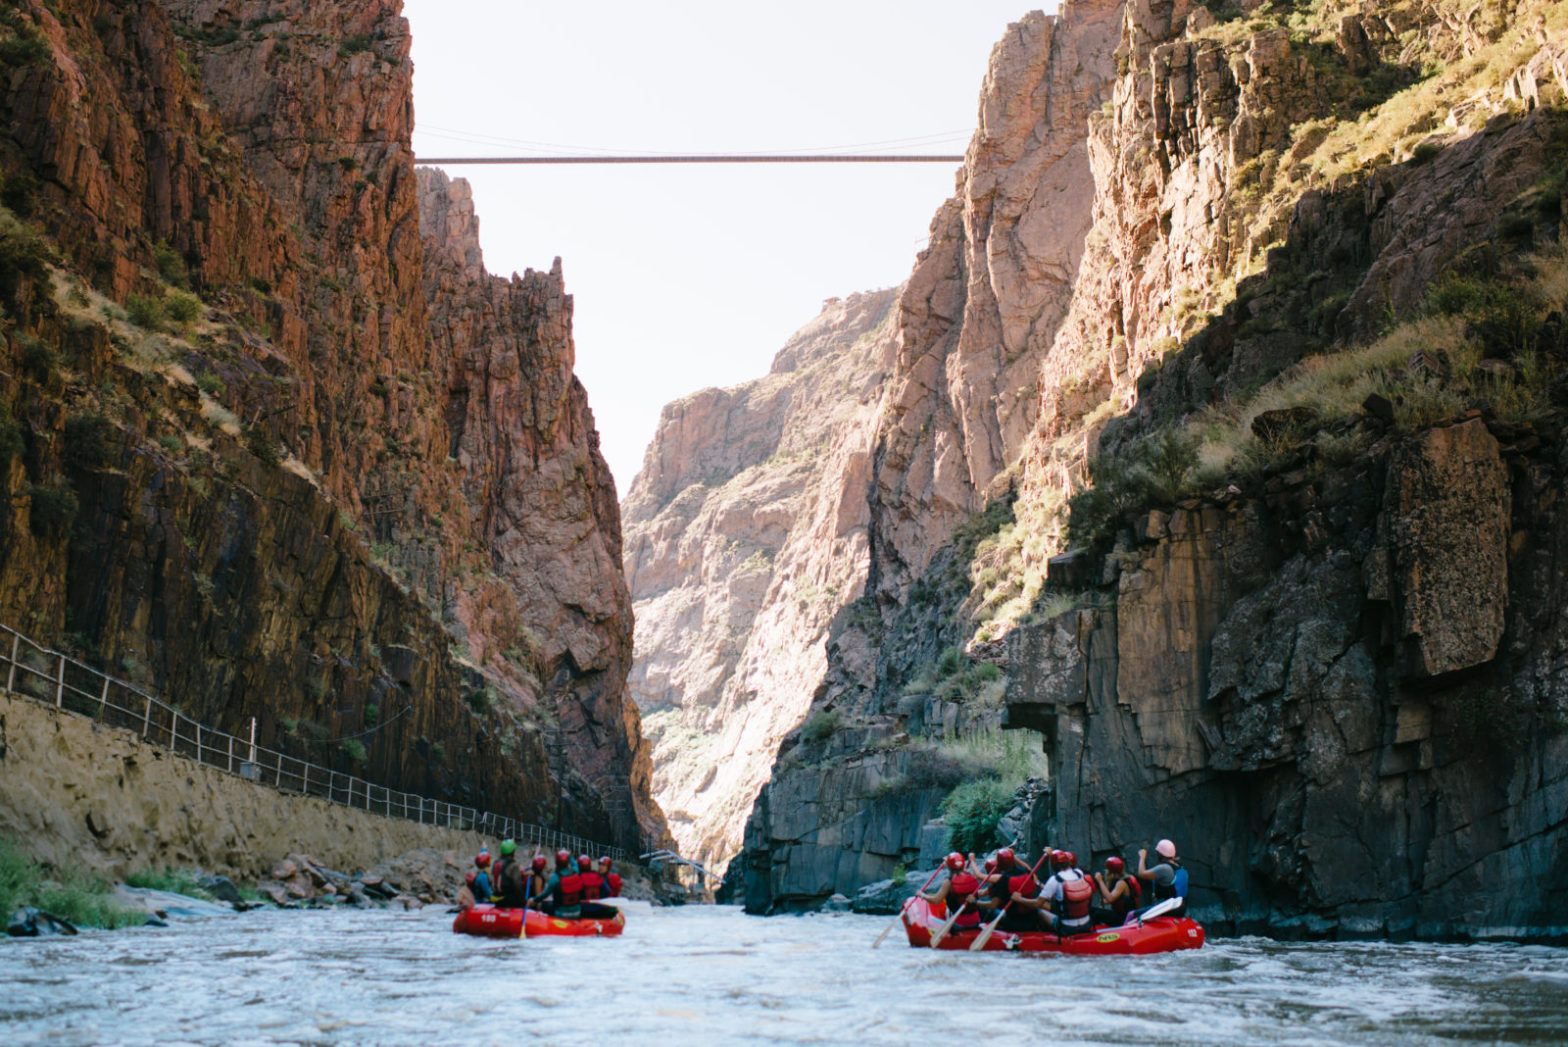 Visiting the Royal Gorge in Cañon City: Where to Eat, Play, and Sleep